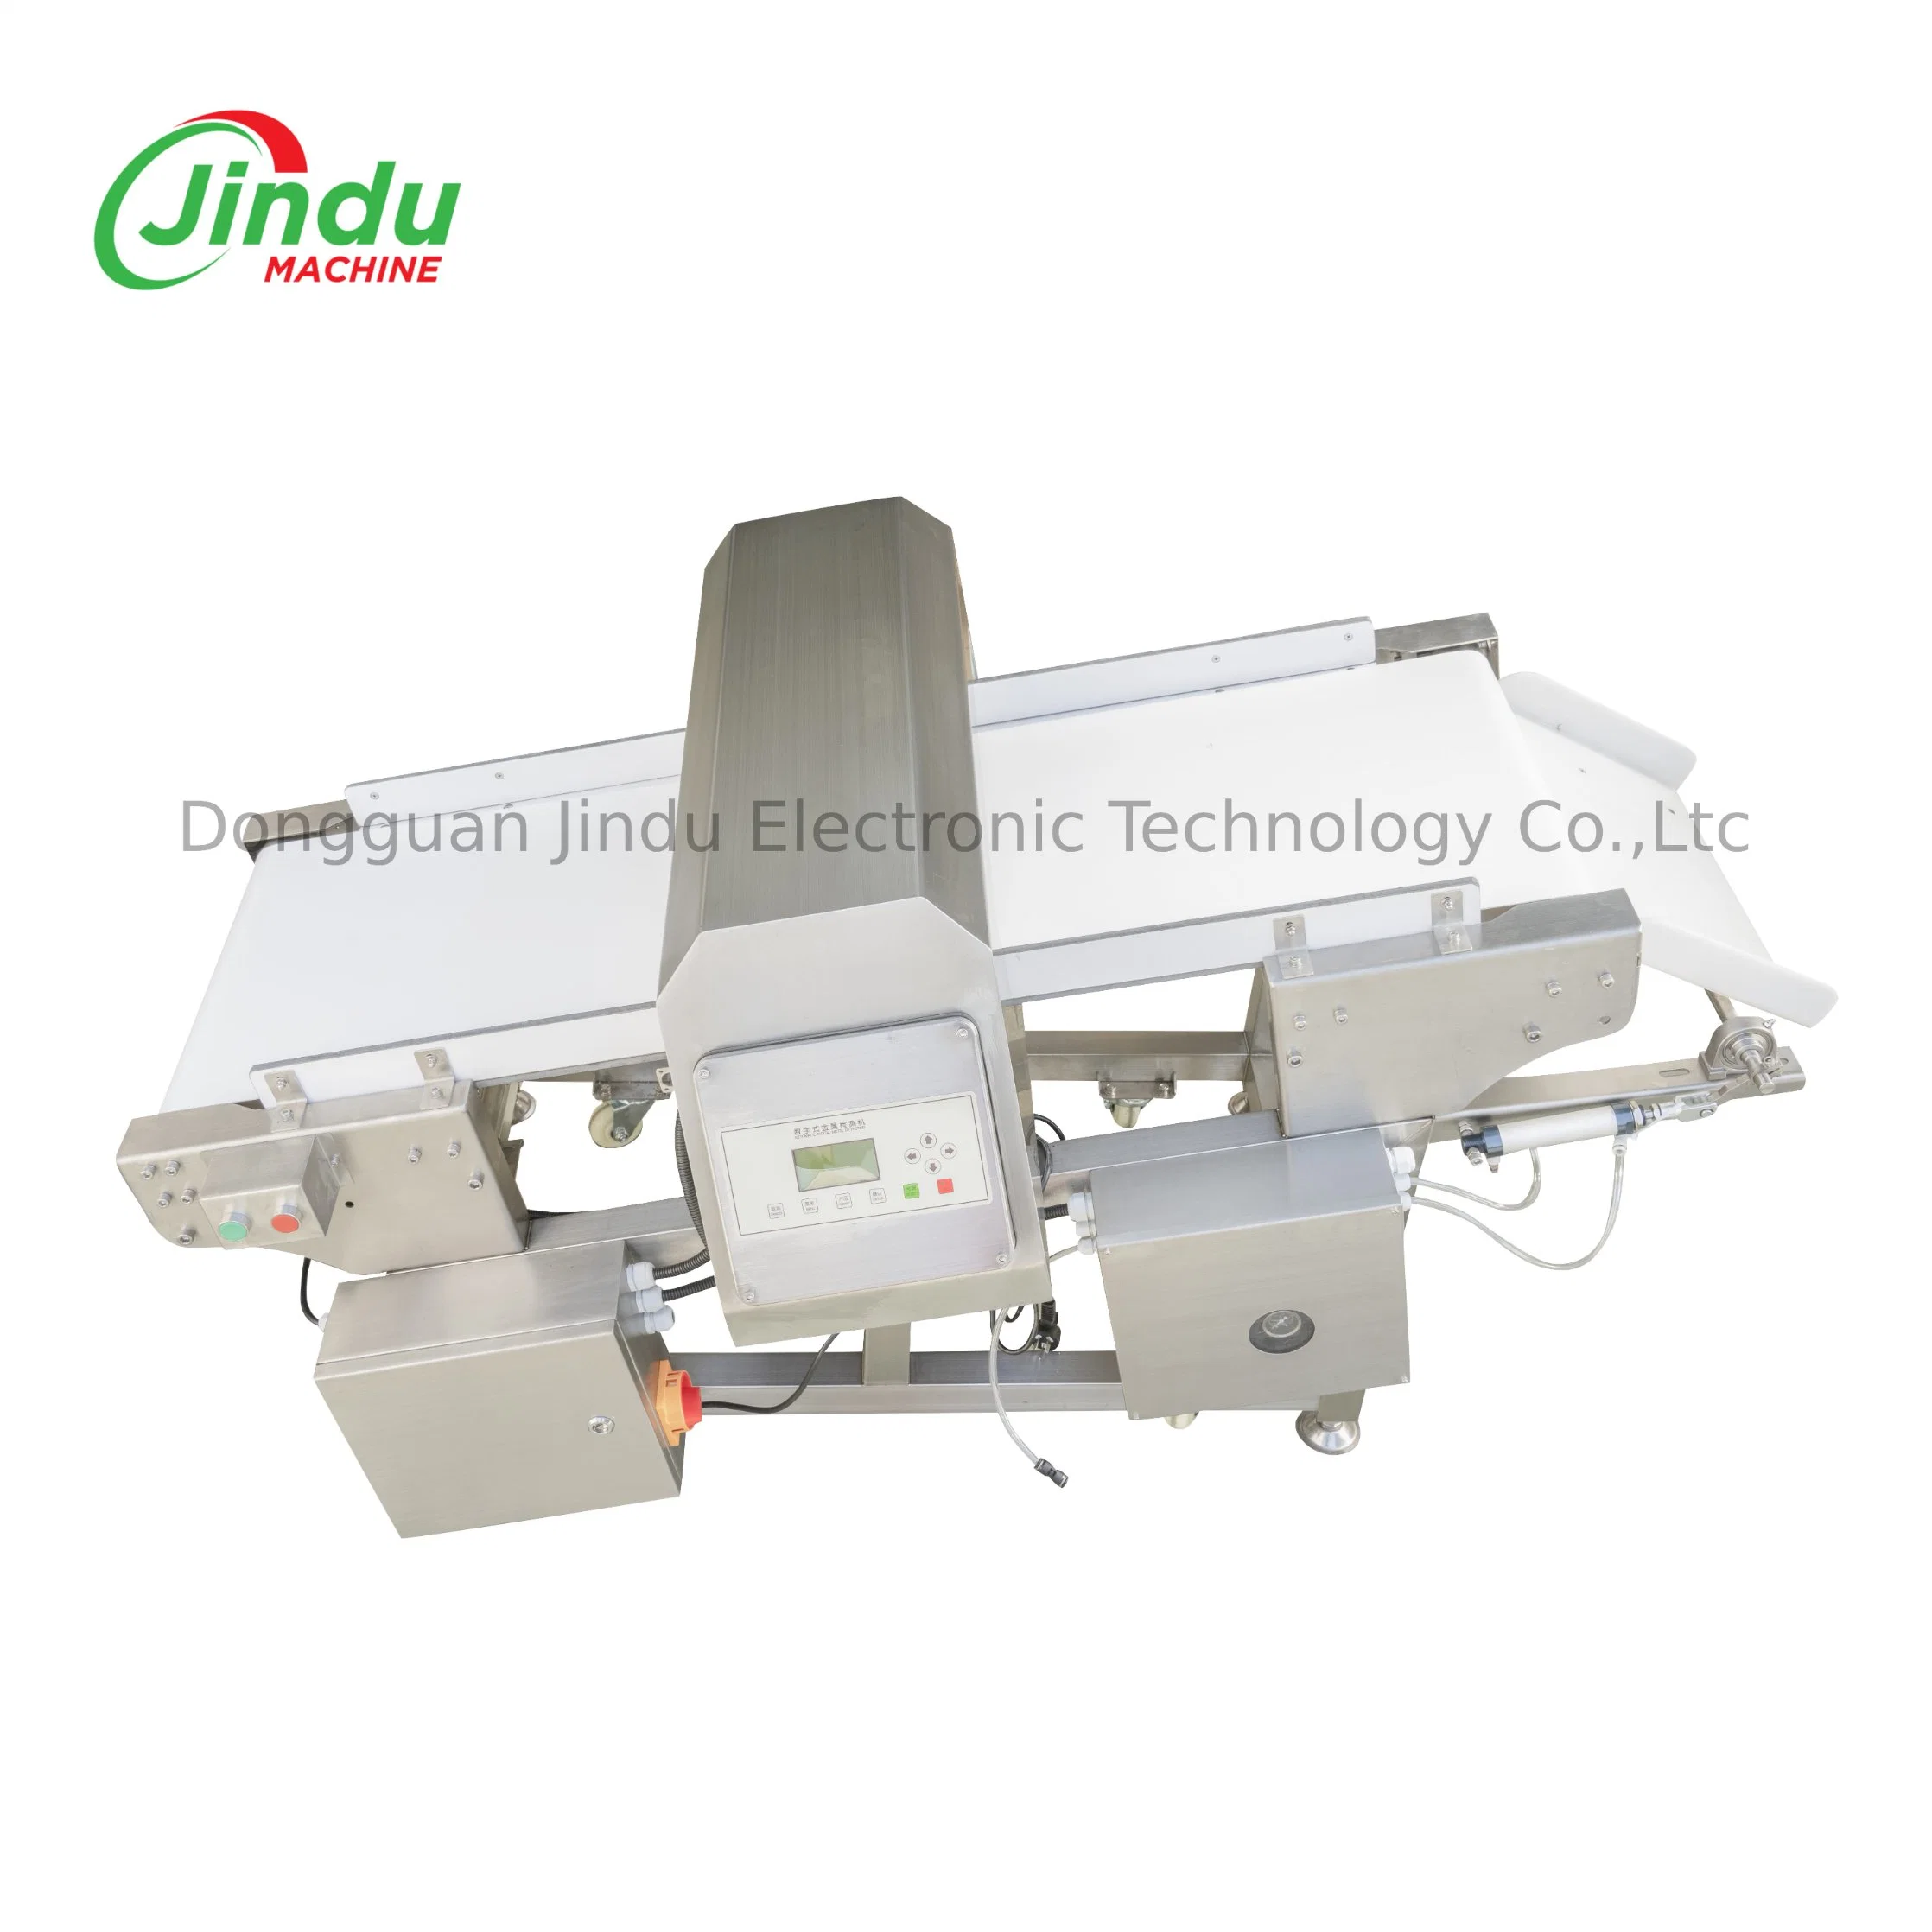 Detector Inspection Systems Food Metal Detectors for Food Processing